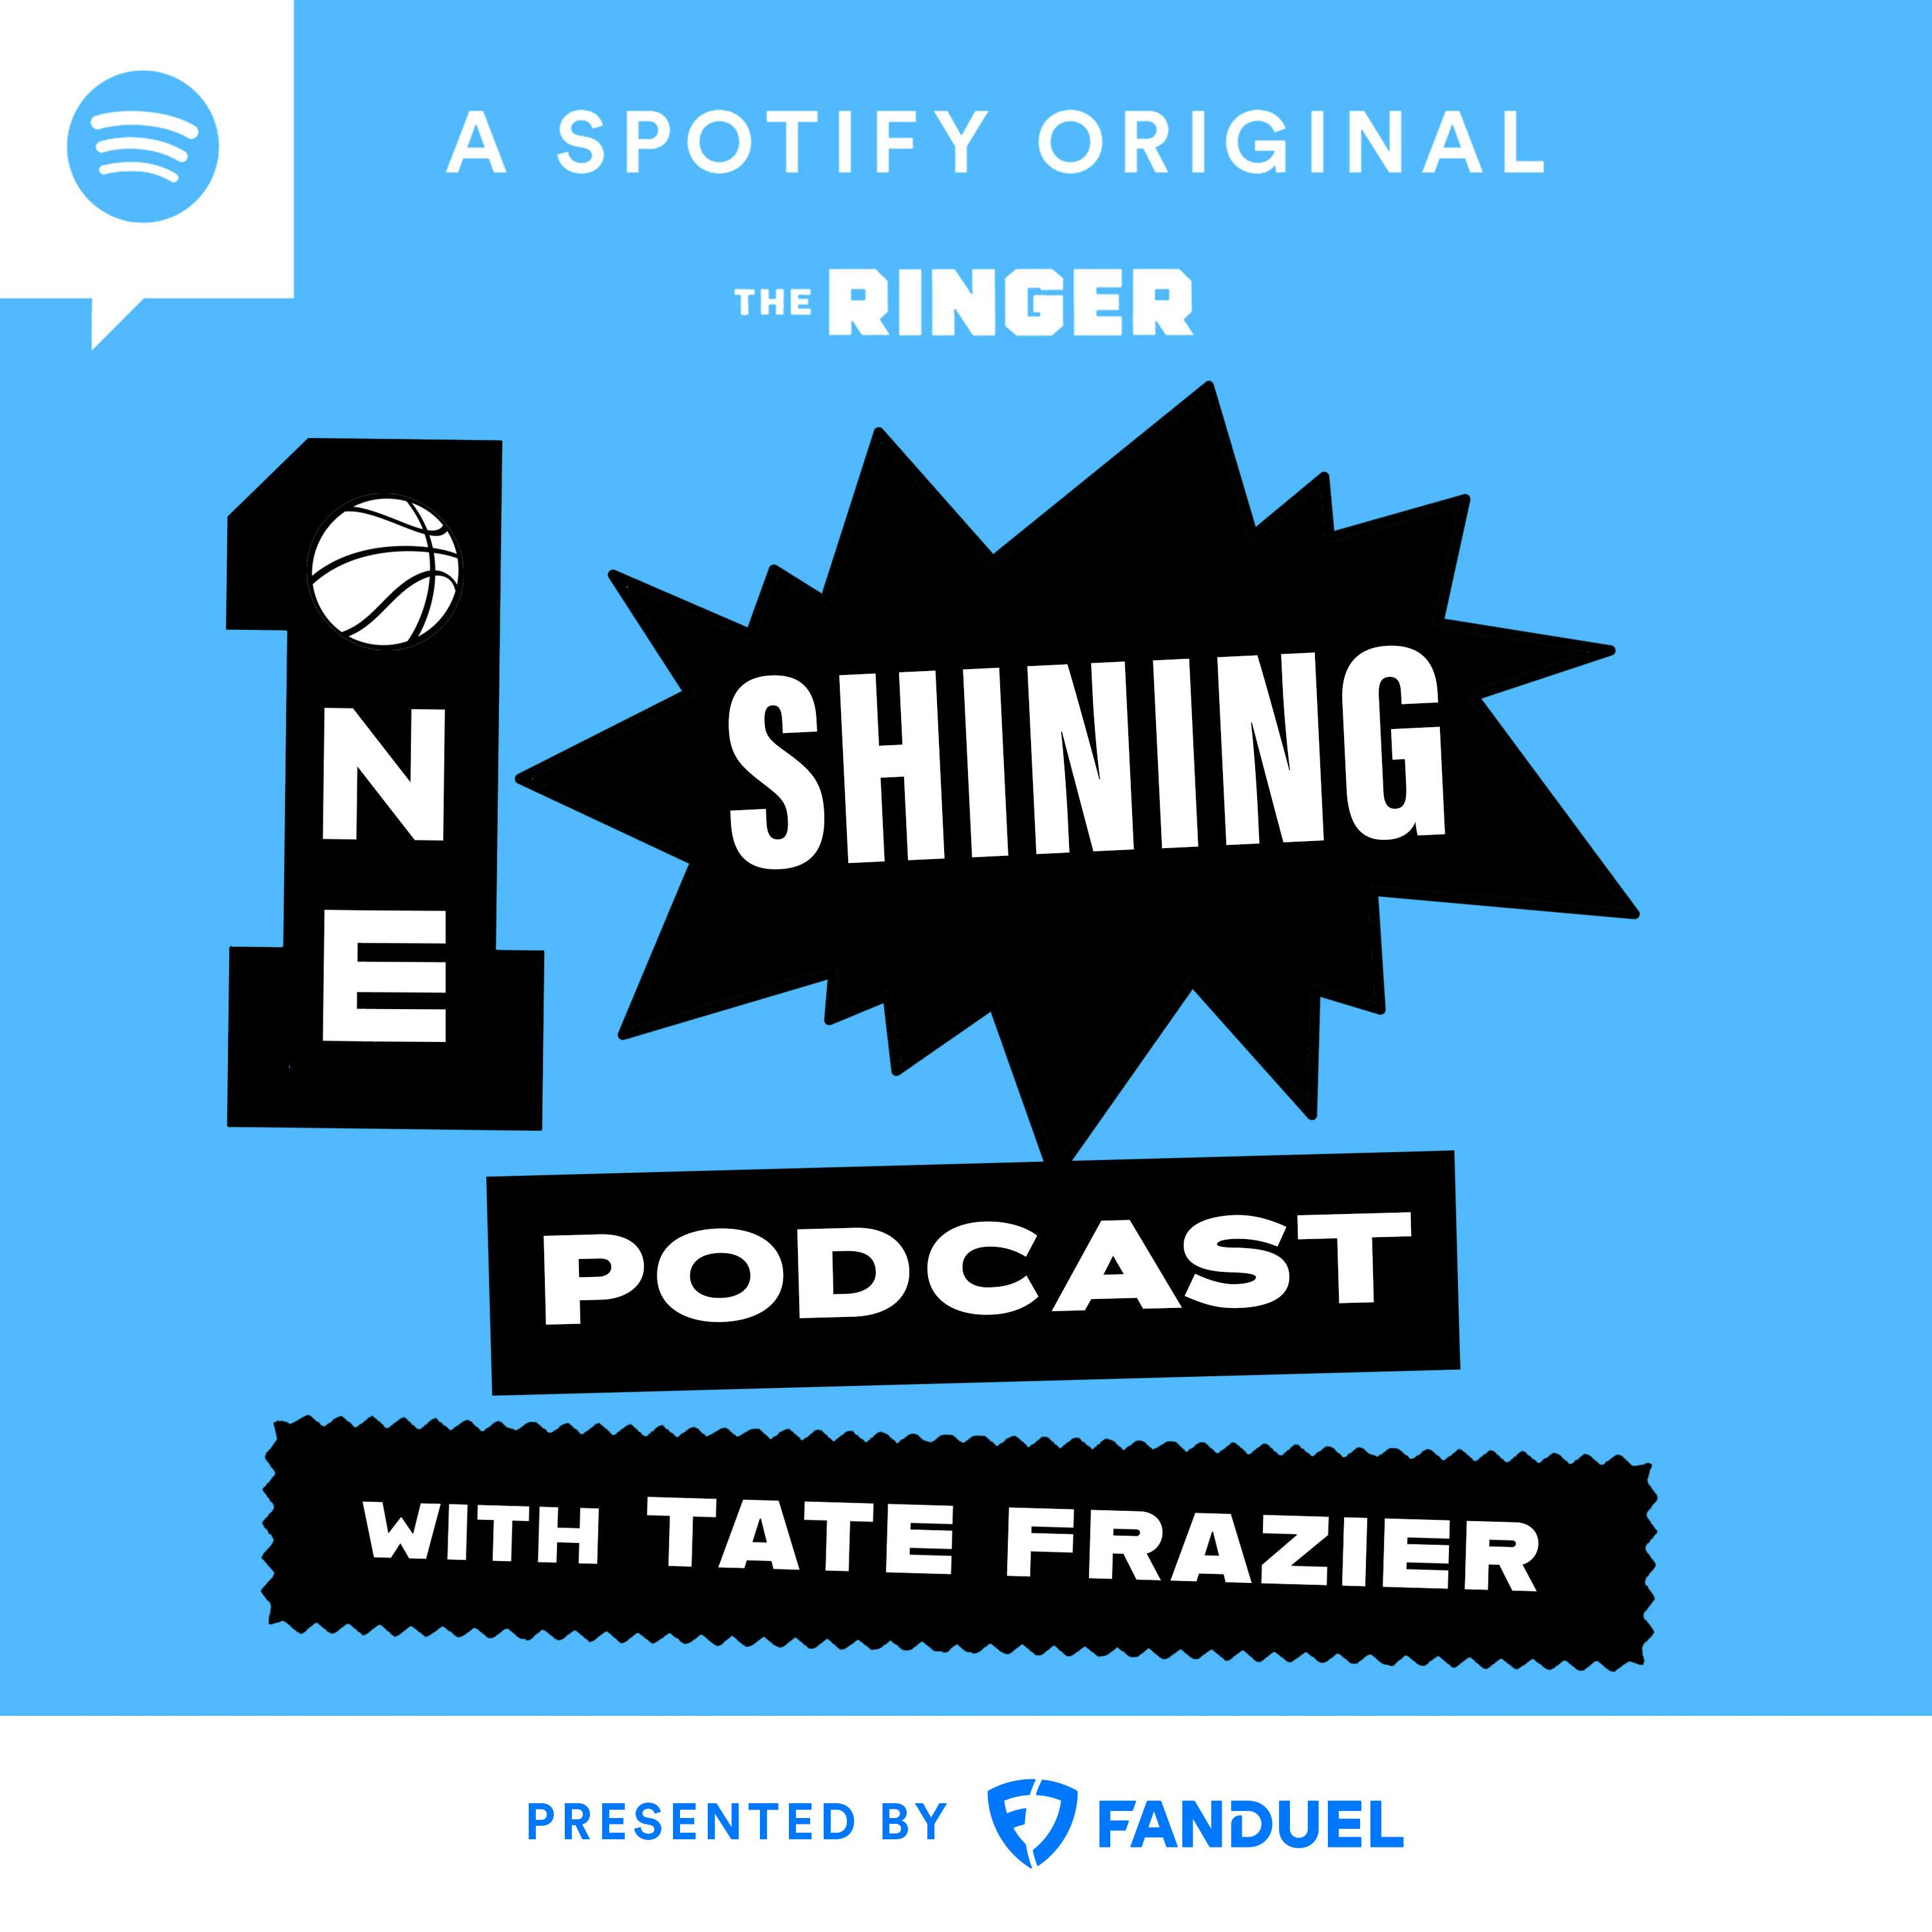 One Shining Podcast with Tate Frazier:The Ringer